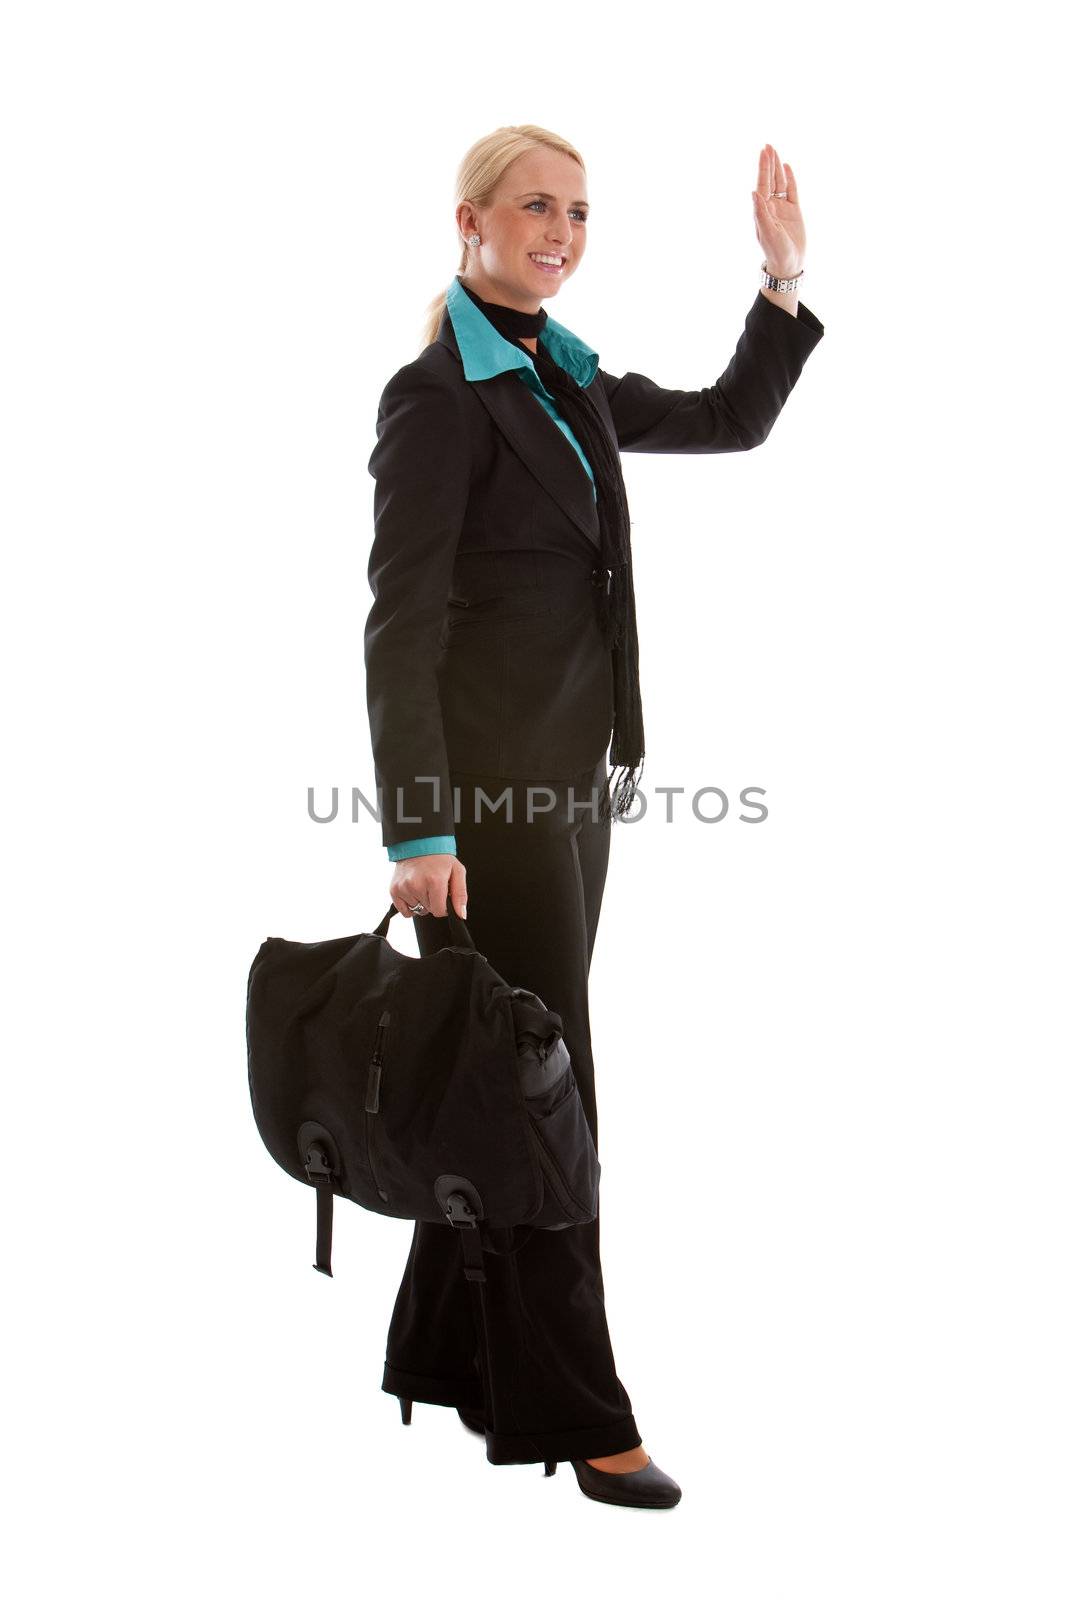 Business woman friendly greeting someone while holding a bag